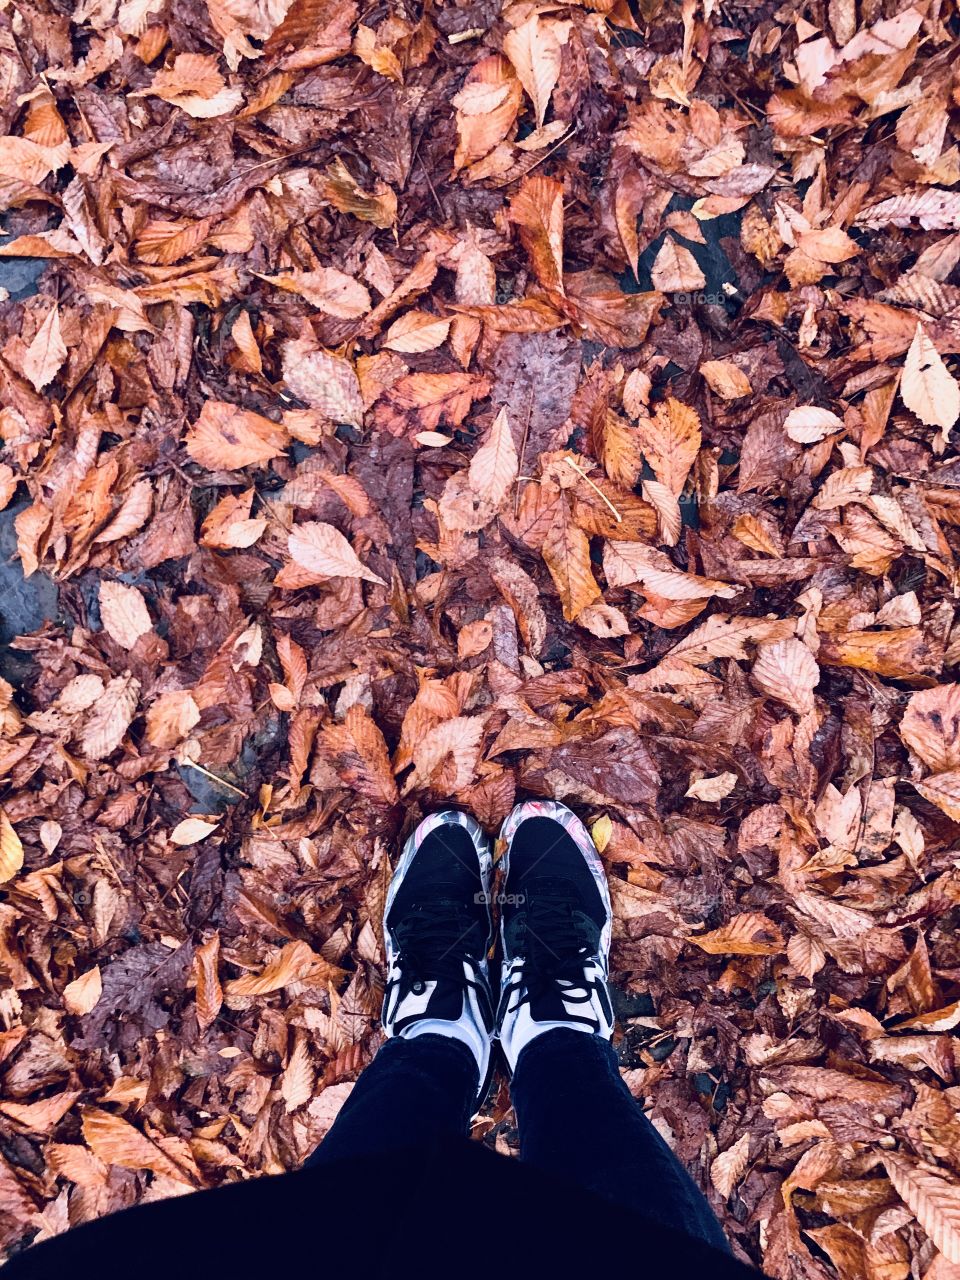 Leaves on the ground during autumn